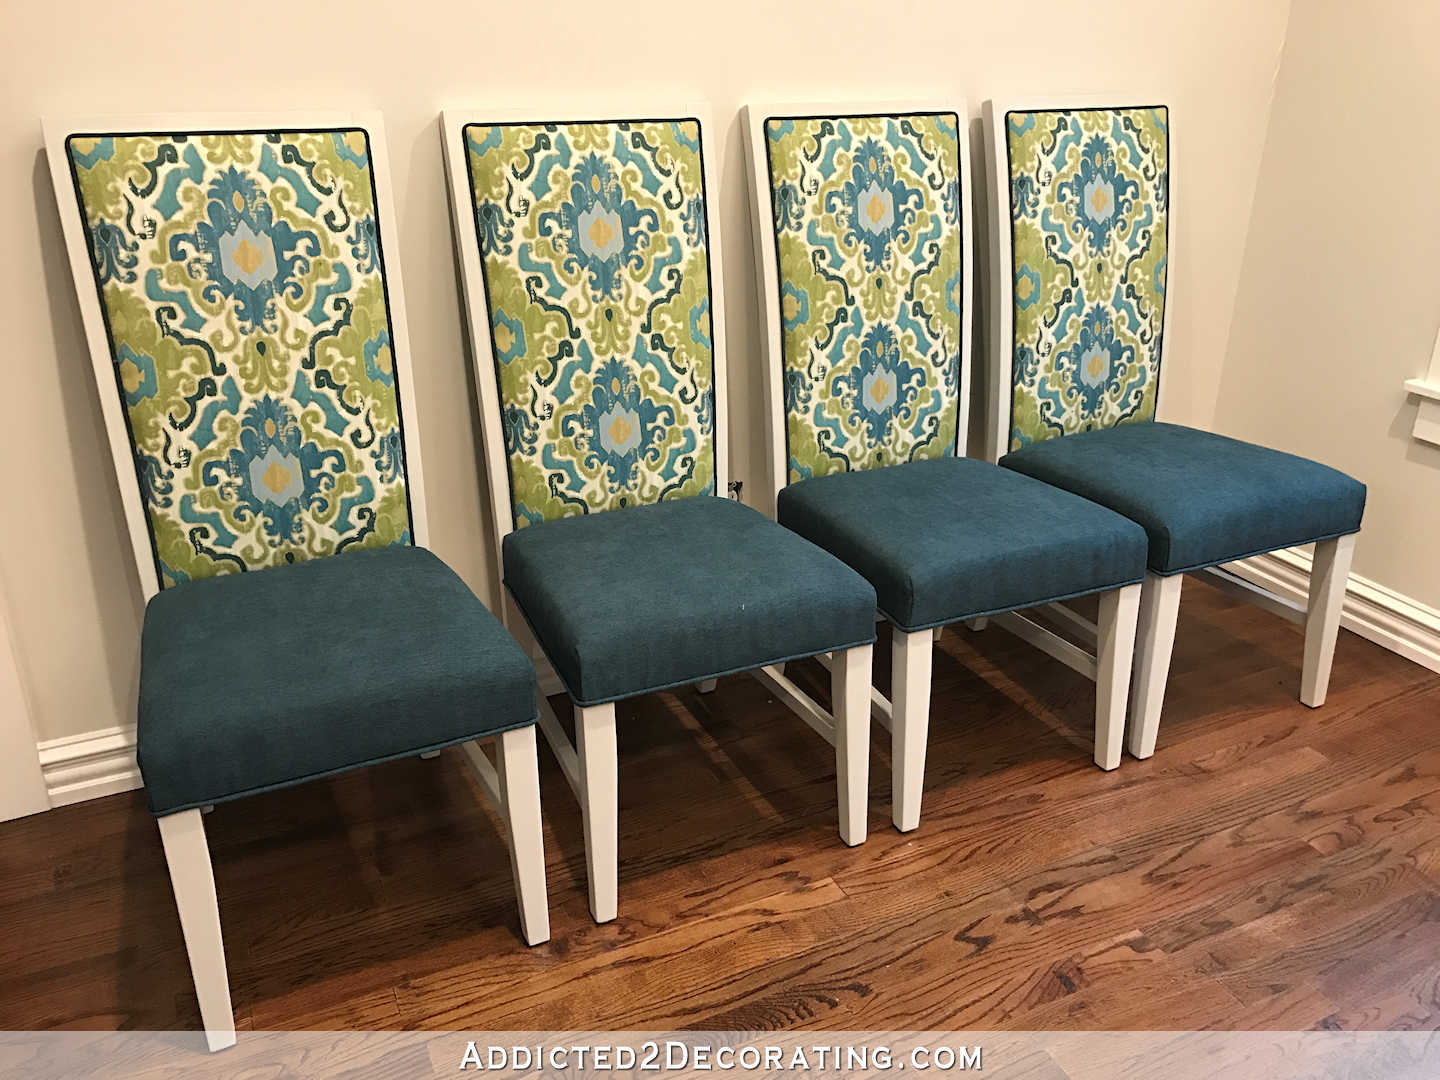 breakfast room dining chair makeover - after - fronts of chairs